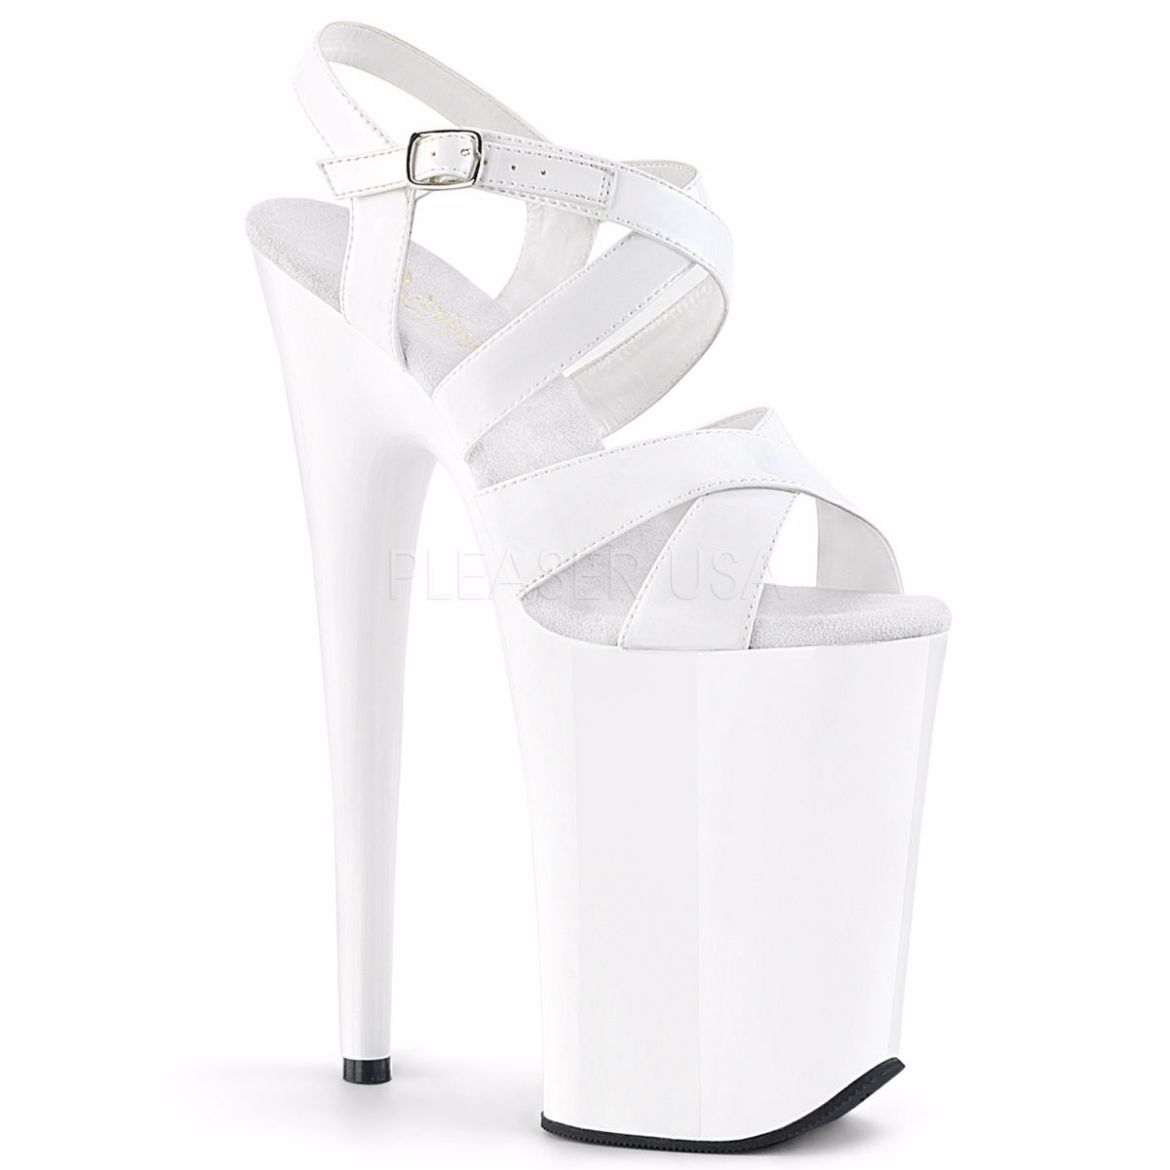 Product image of Pleaser Infinity-997 White Patent/White, 9 inch (22.9 cm) Heel, 5 1/4 inch (13.3 cm) Platform Sandal Shoes